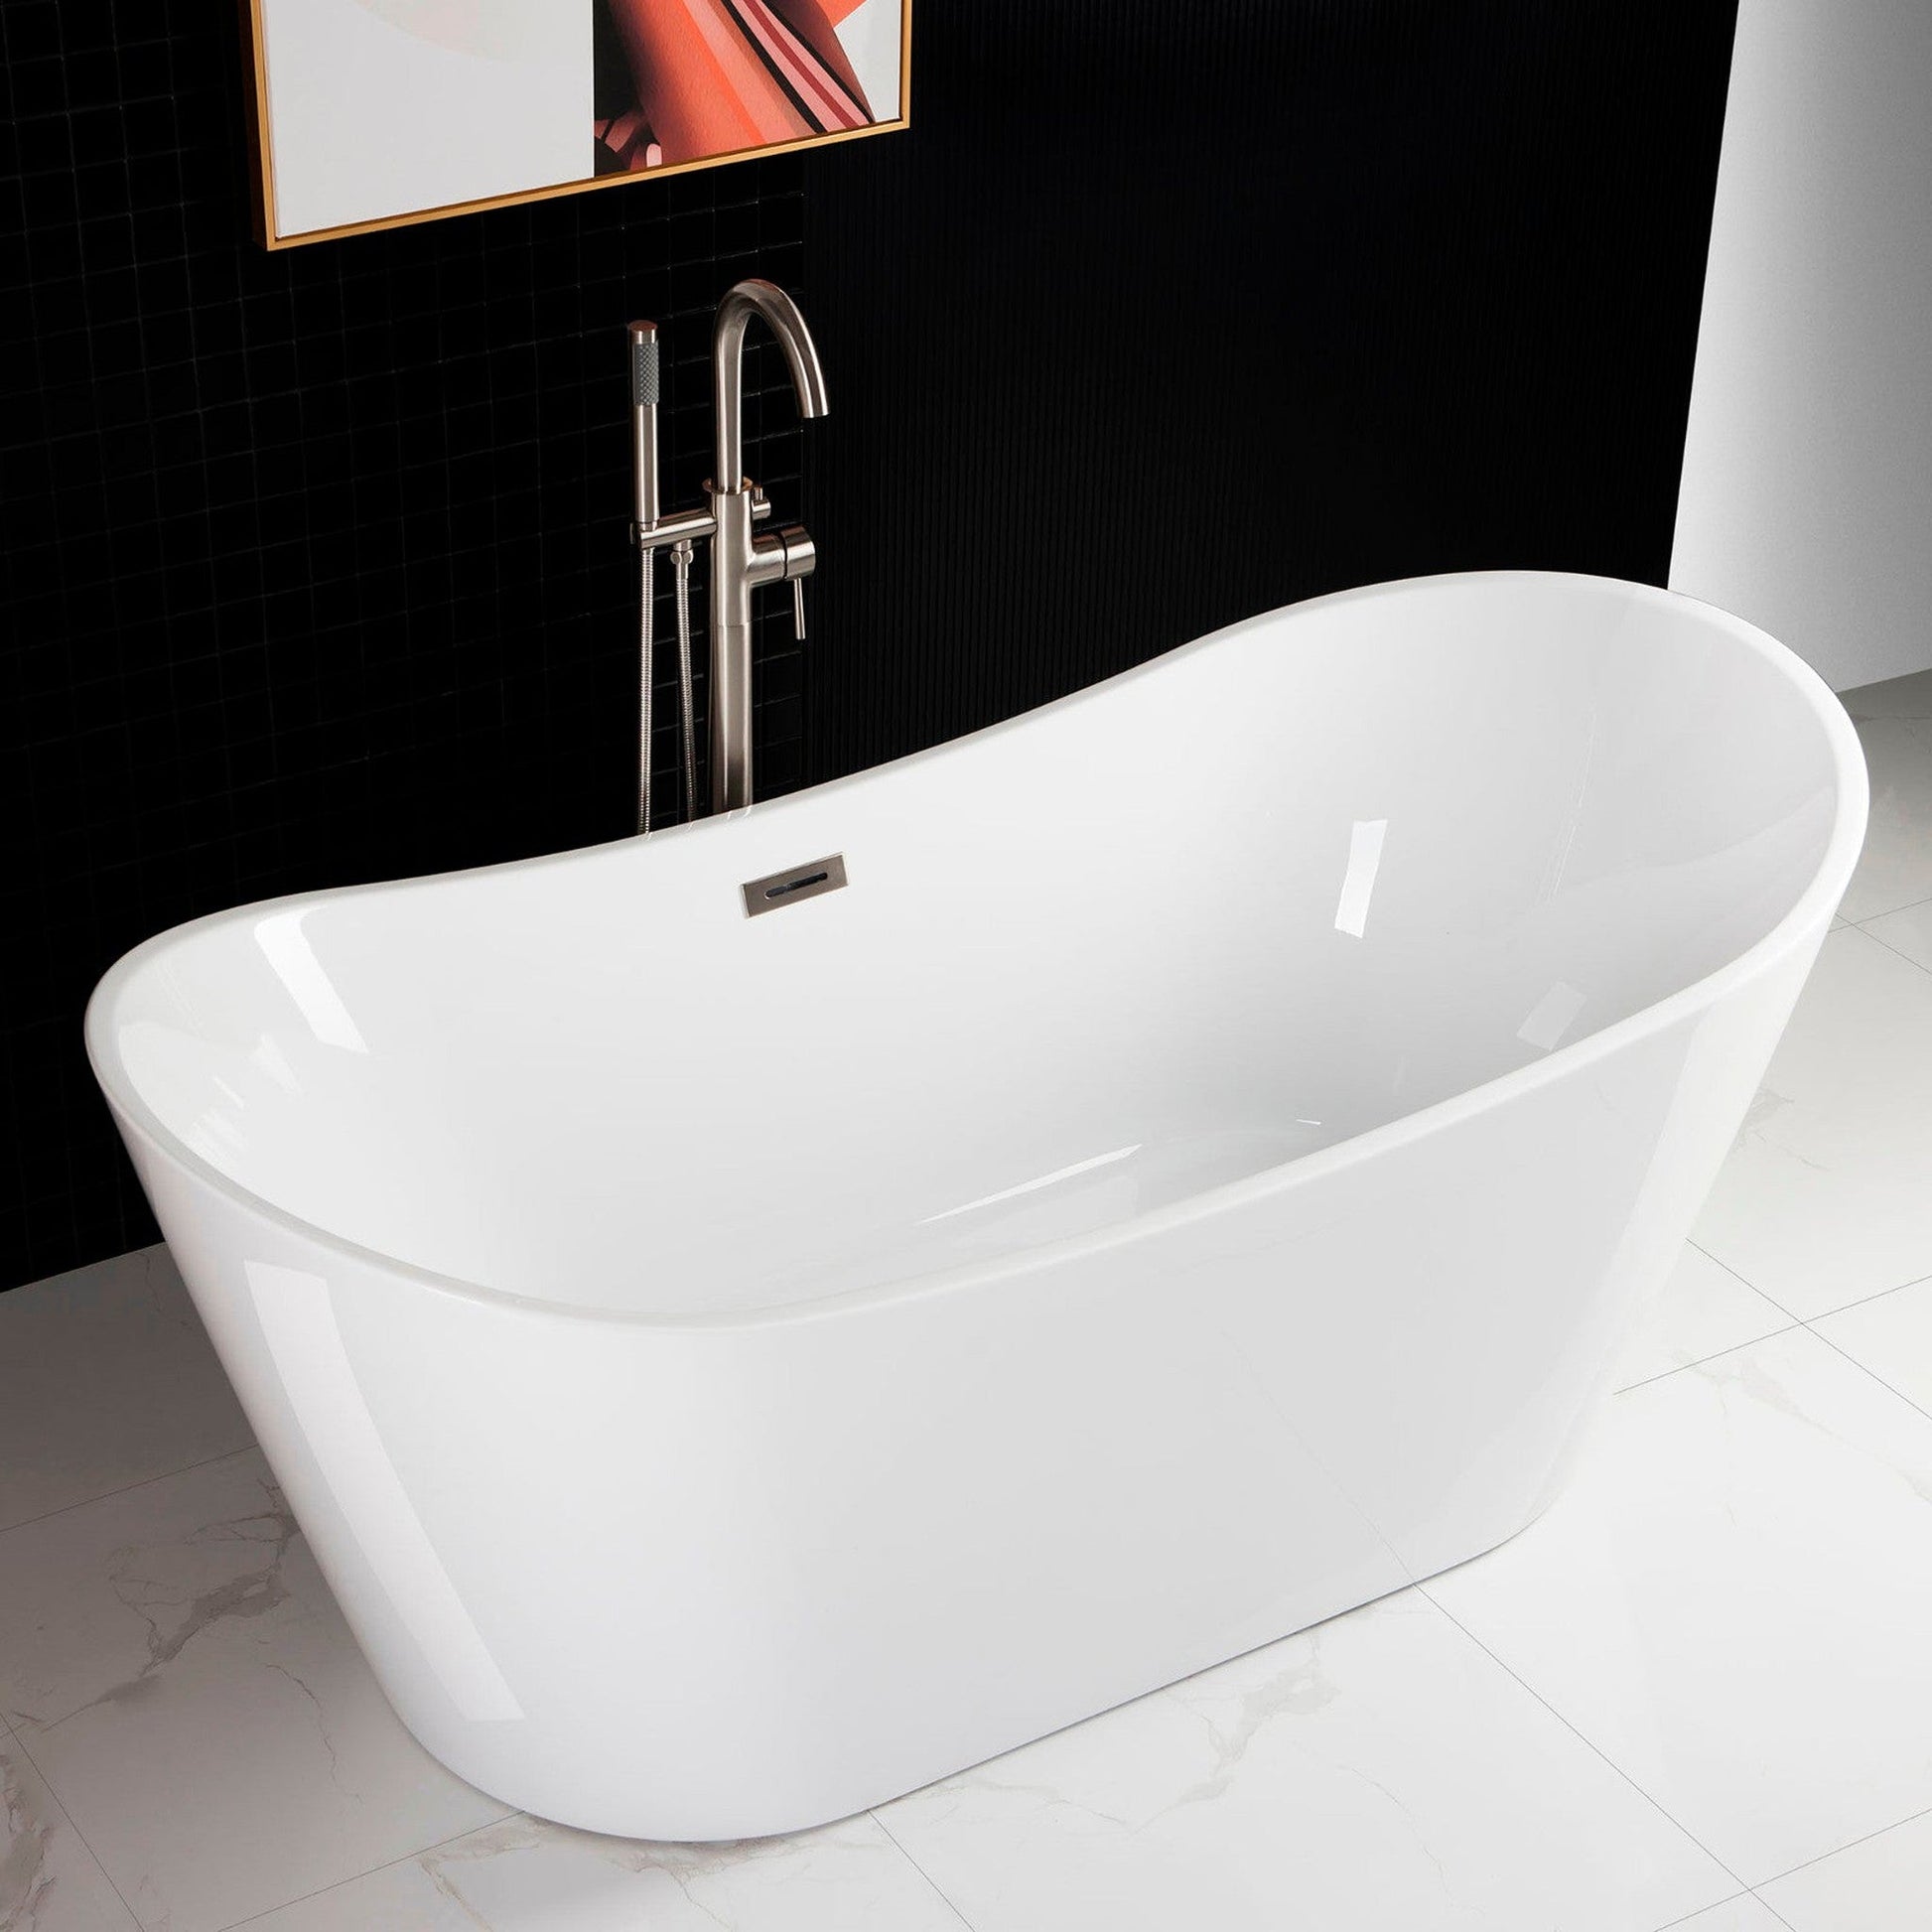 WoodBridge B0010 67" White Acrylic Freestanding Contemporary Soaking Bathtub With Chrome Drain, Overflow, F0002CHVT Tub Filler and Caddy Tray